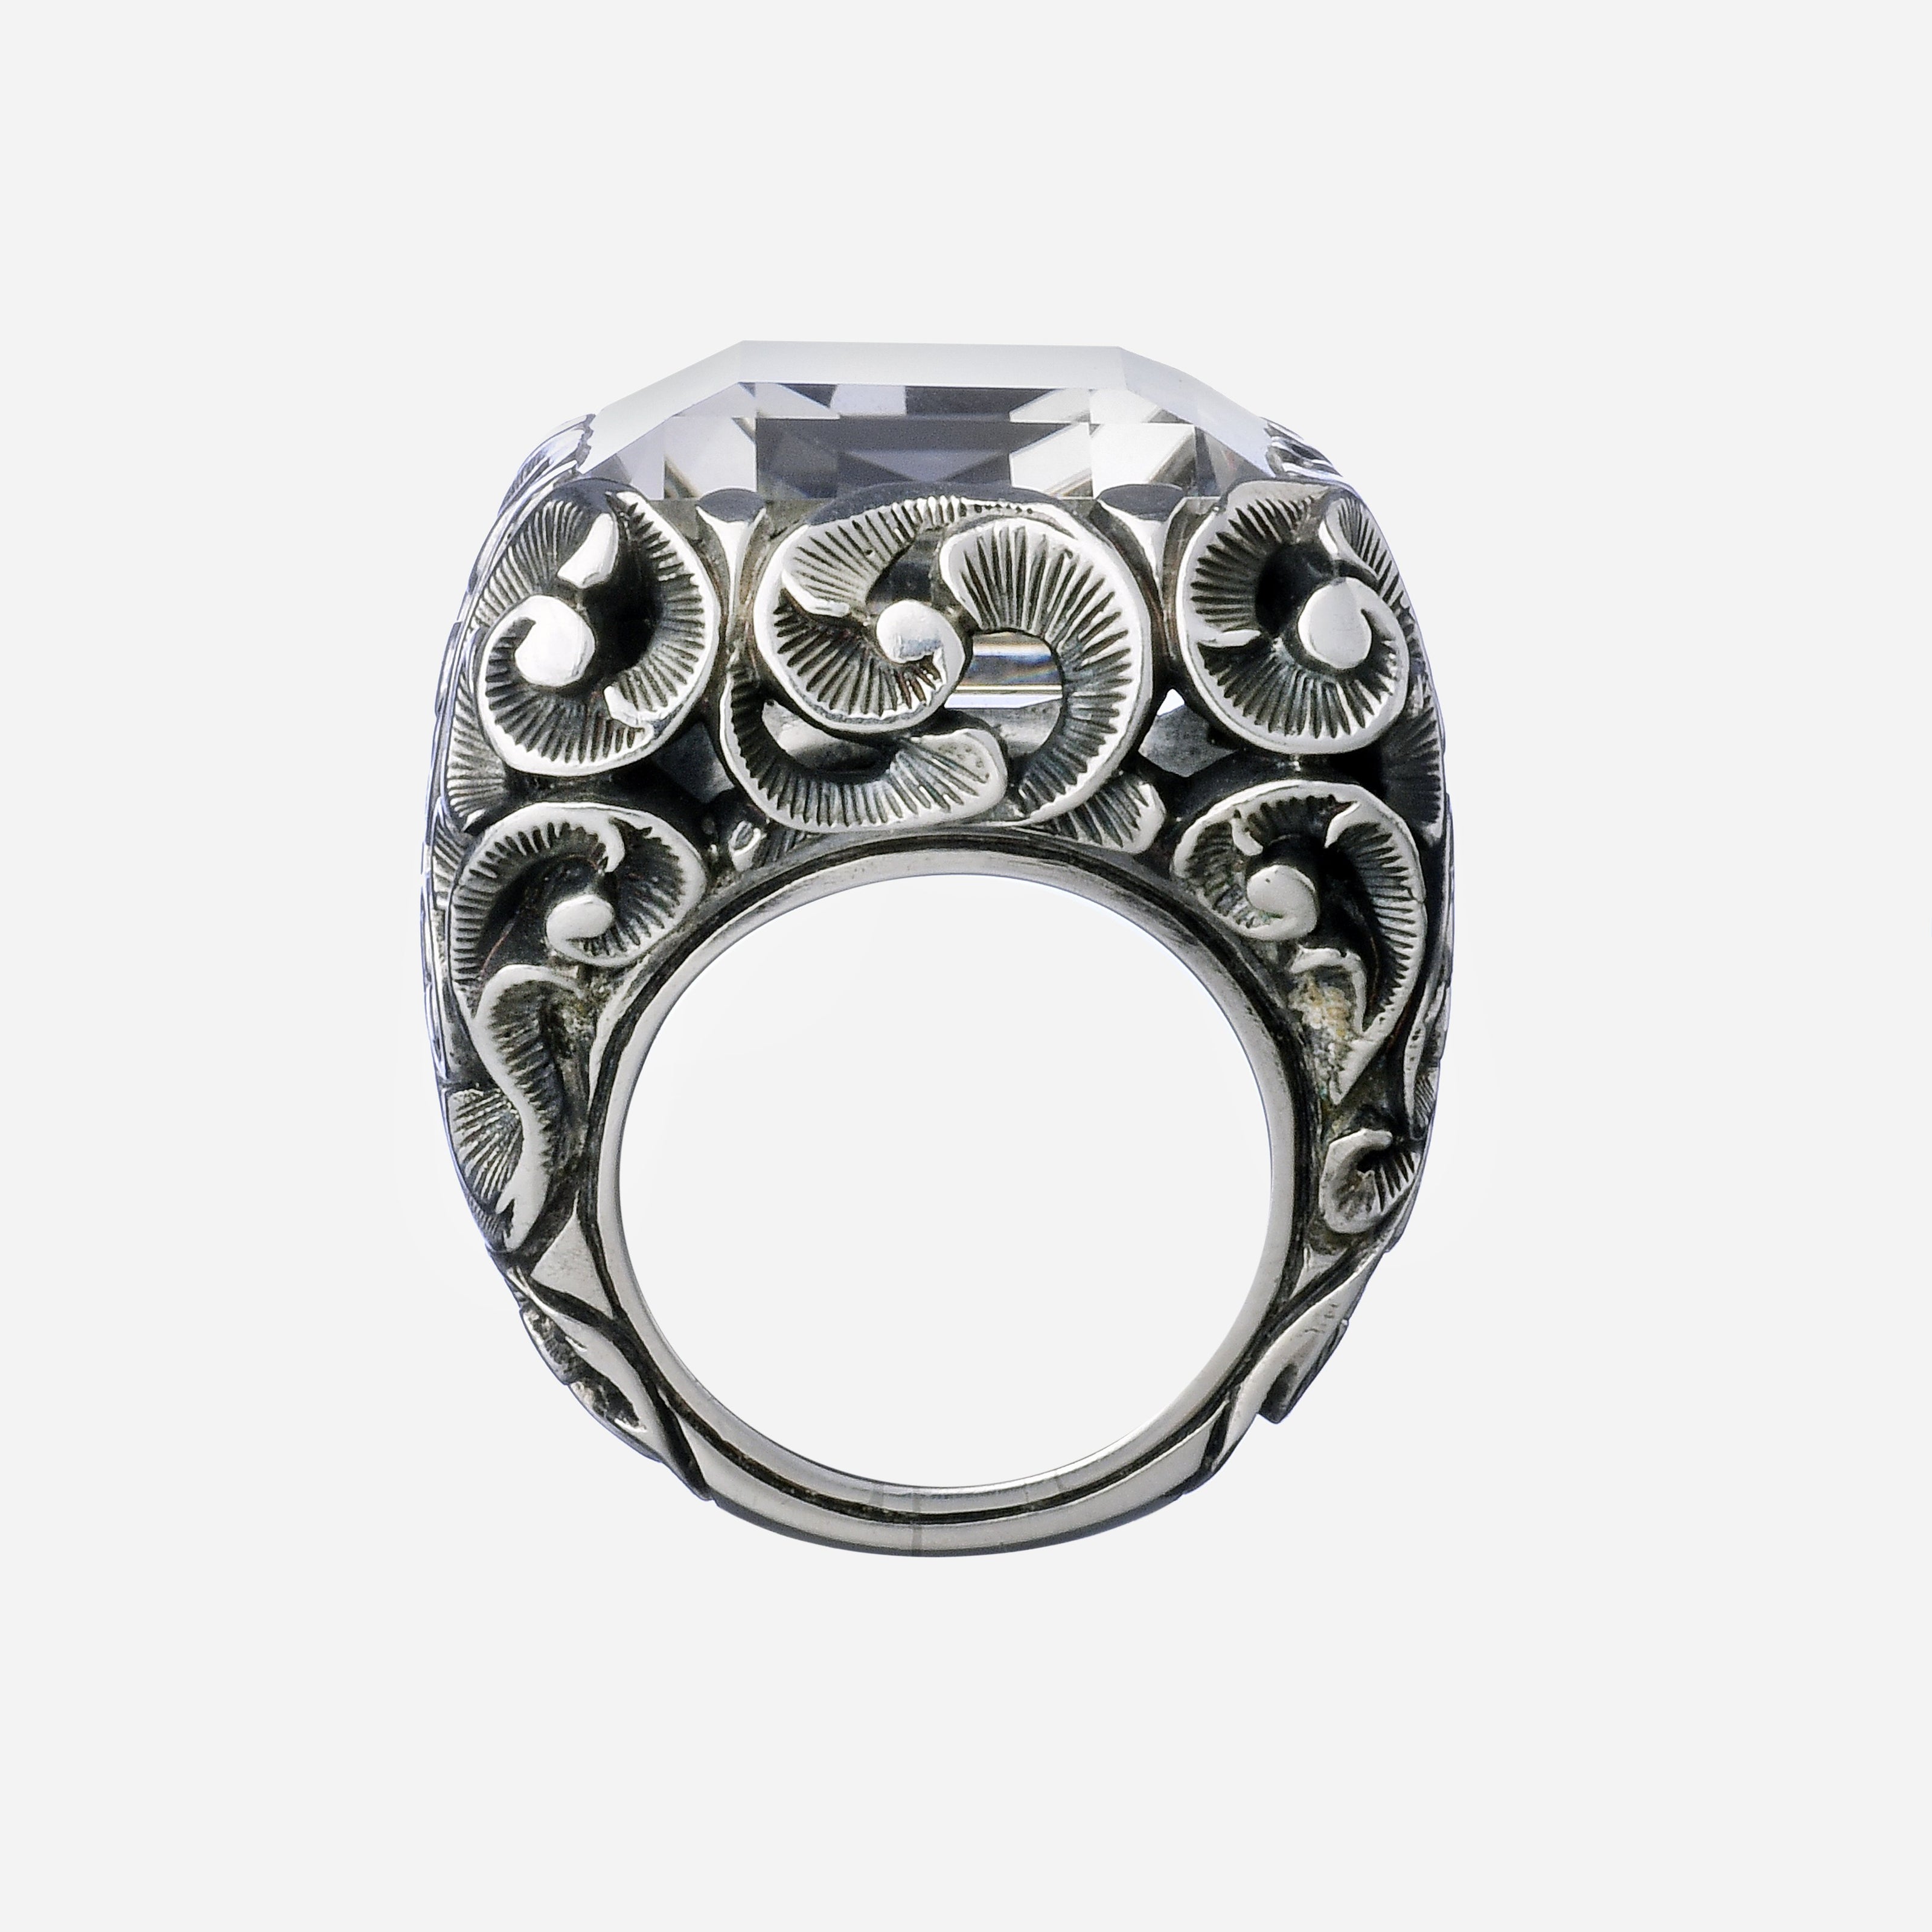 San Marco ring, large emerald cut stone and damask plate